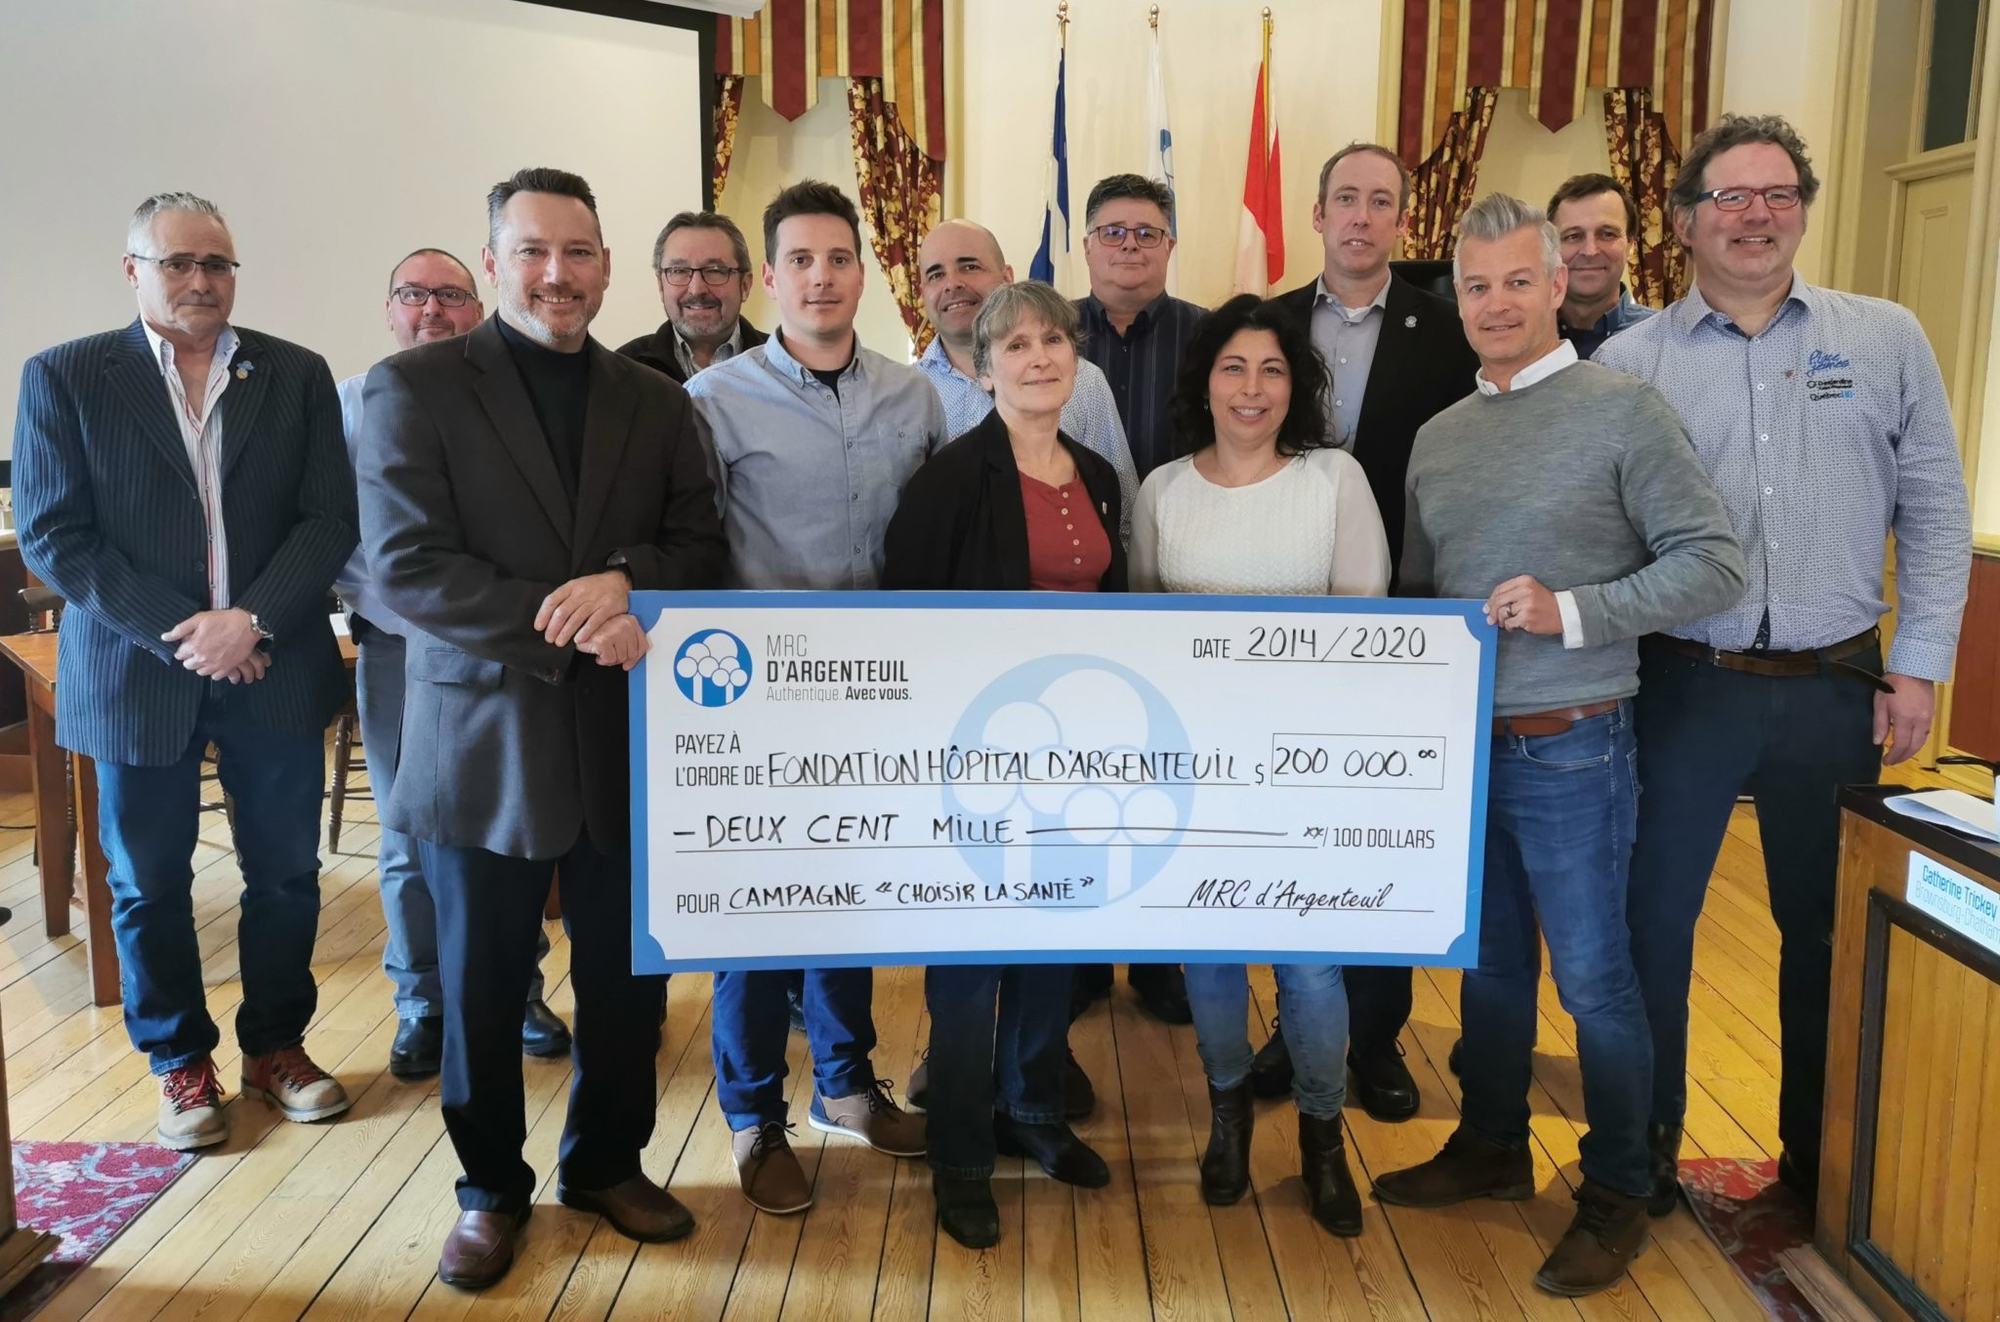 MRC pays final instalment of $200,000 donation to the Argenteuil Hospital Foundation